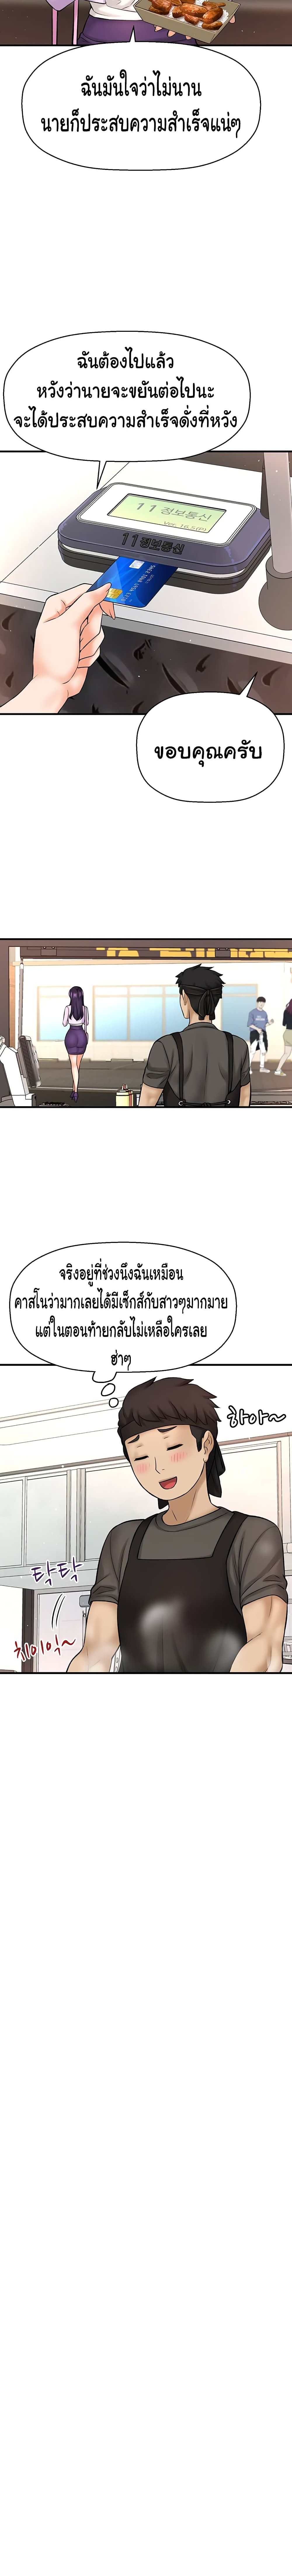 I Want to Know Her 35-ตอนจบ